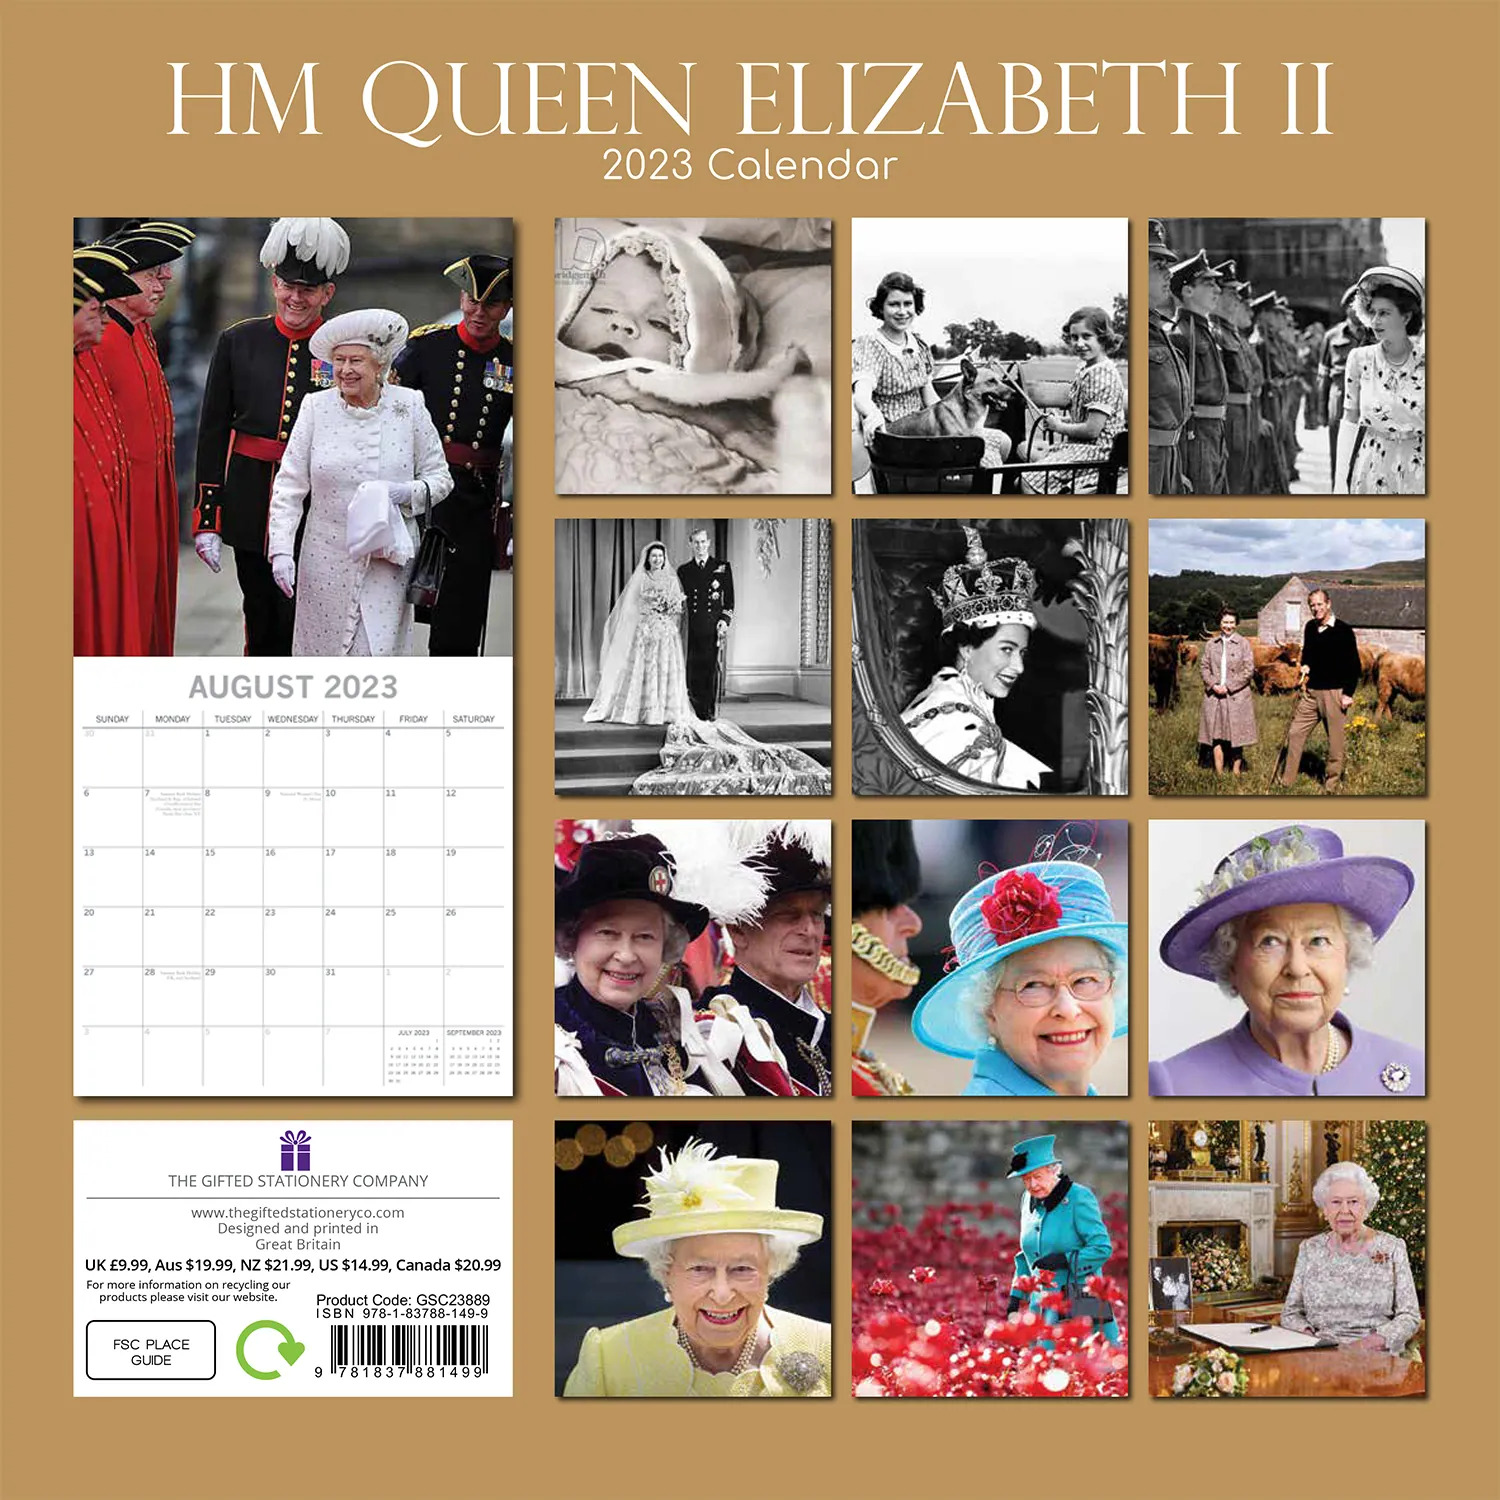 2023 Calendar HM Queen Elizabeth II Square Wall by The Gifted